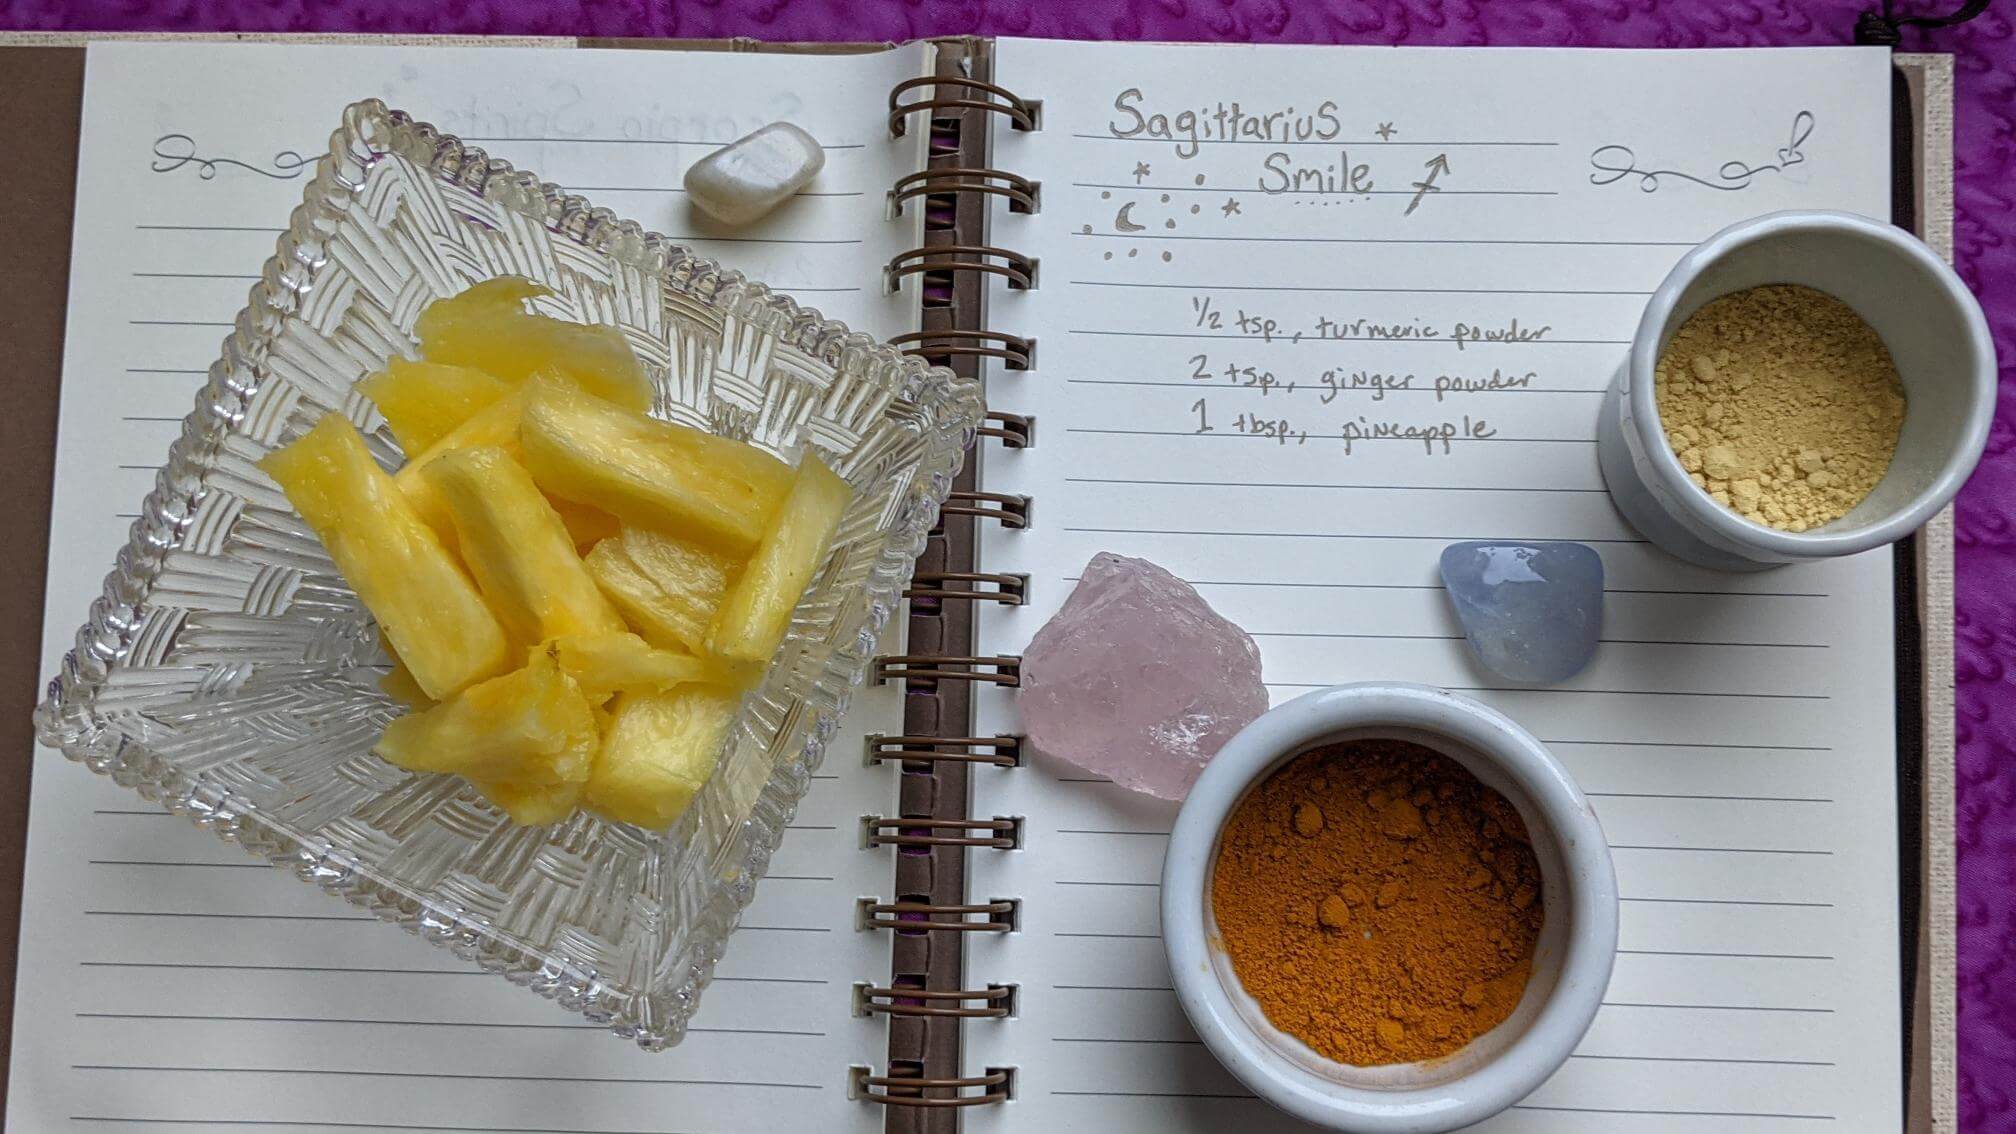 The handwritten recipe is featured with a crystal bowl filled with sliced pineapple. A rose and smoky quartz are scattered on the book with two shallow bowls of dried ginger and dried turmeric powder natural light.